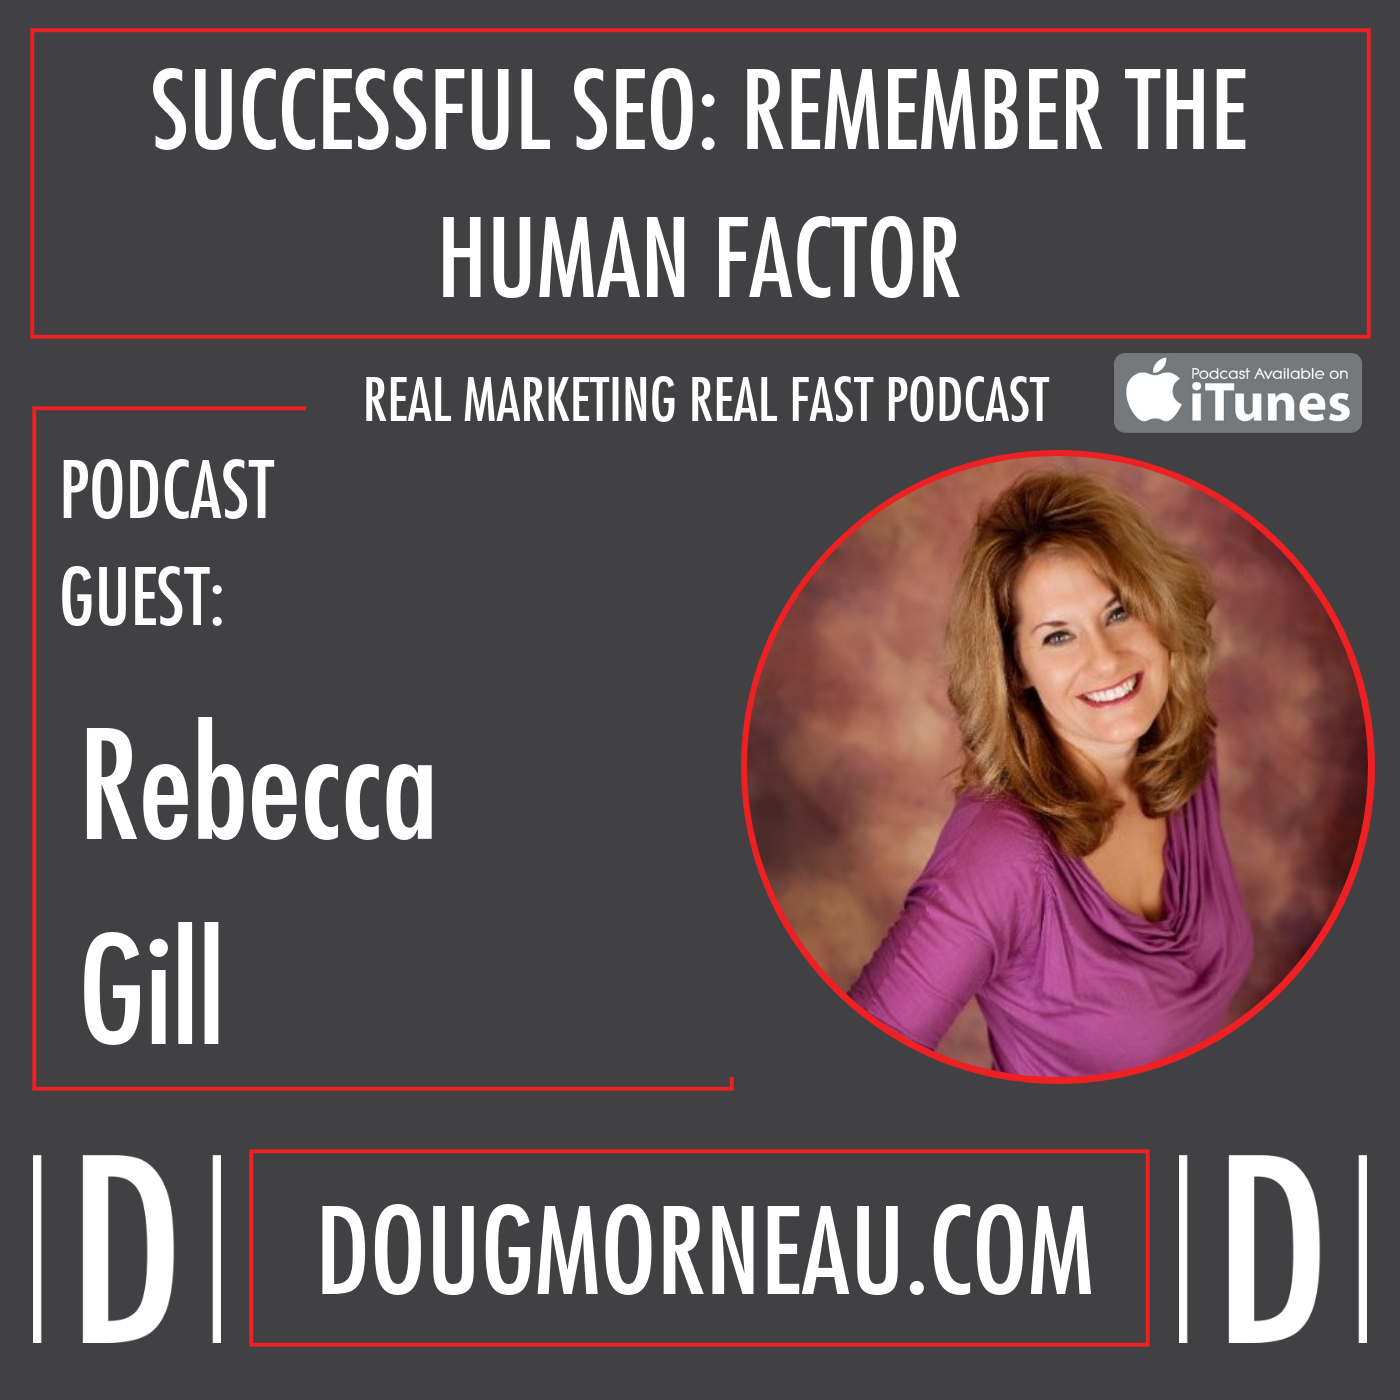 SUCCESSFUL SEO: REMEMBER THE HUMAN FACTOR REBECCA GILL - DOUG MORNEAU - REAL MARKETING REAL FAST PODCAST